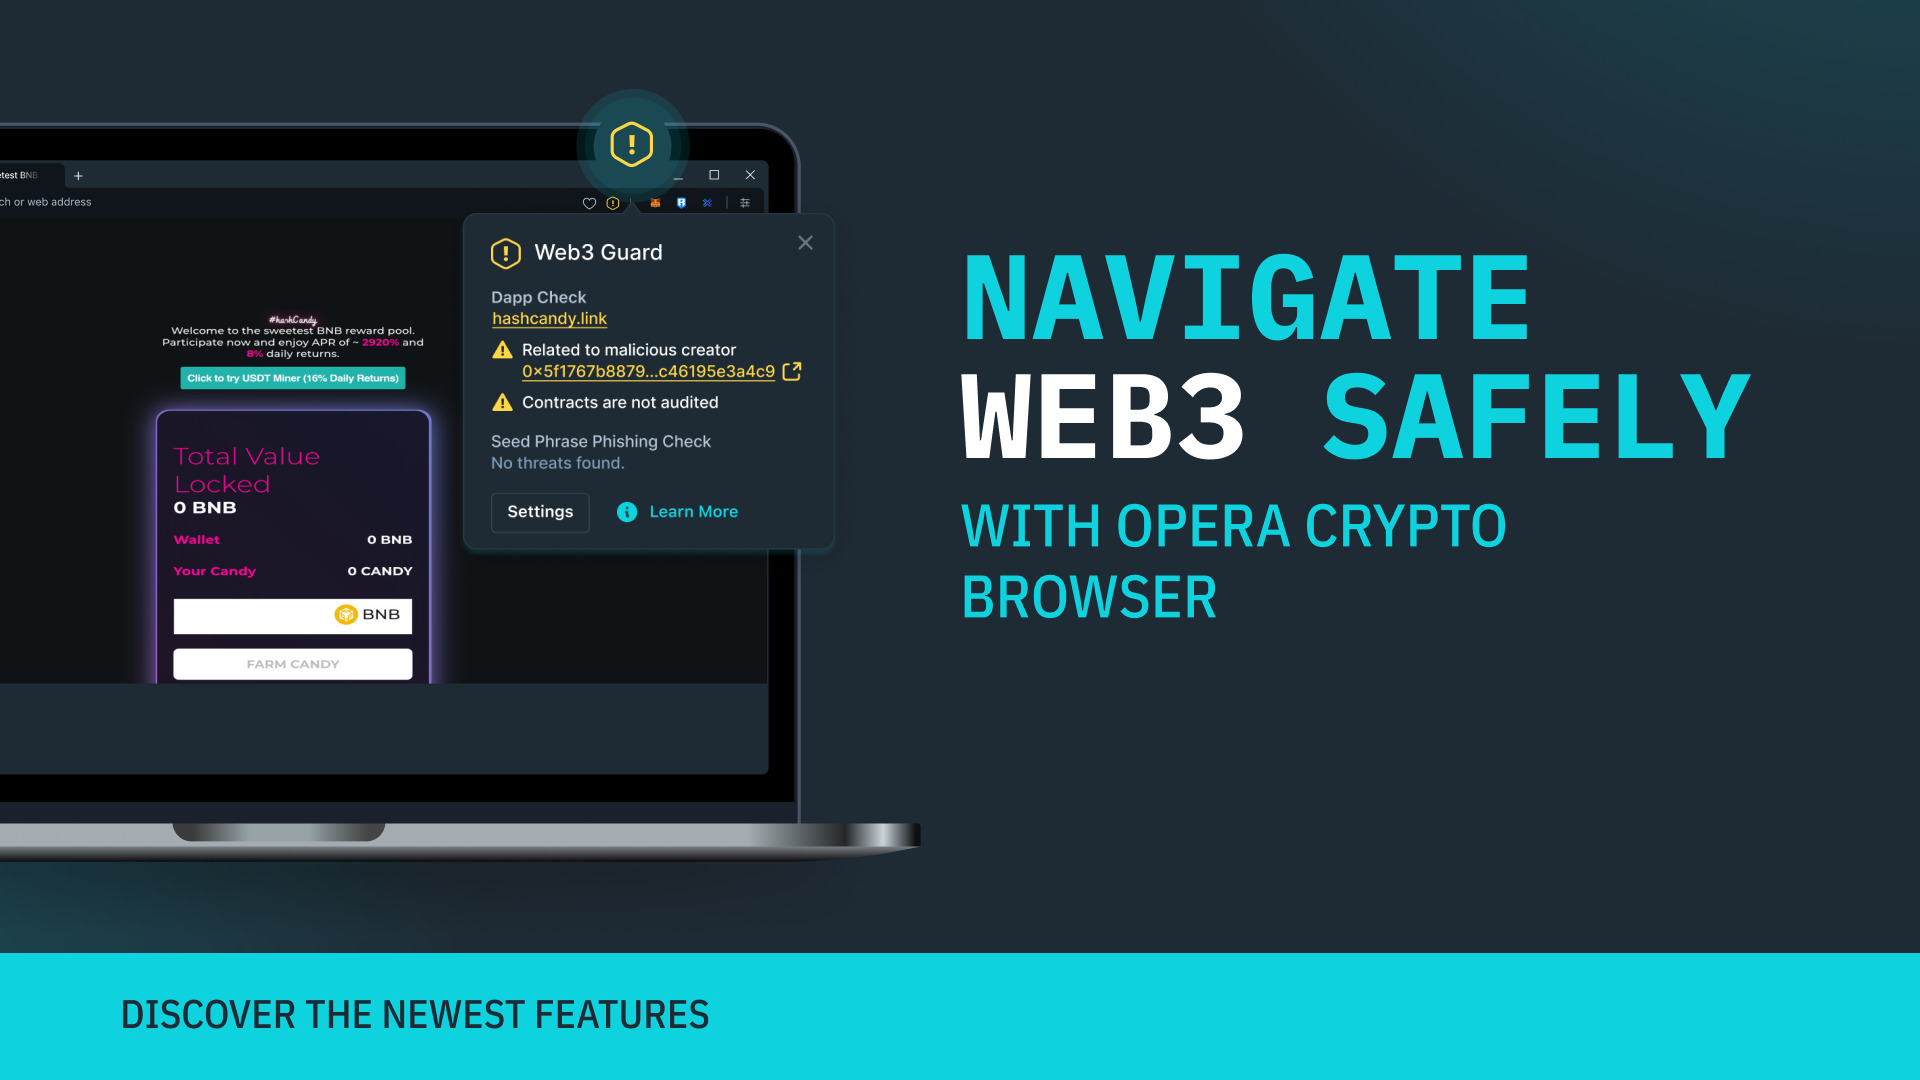 Opera Crypto Browser now with Web3 Guard.